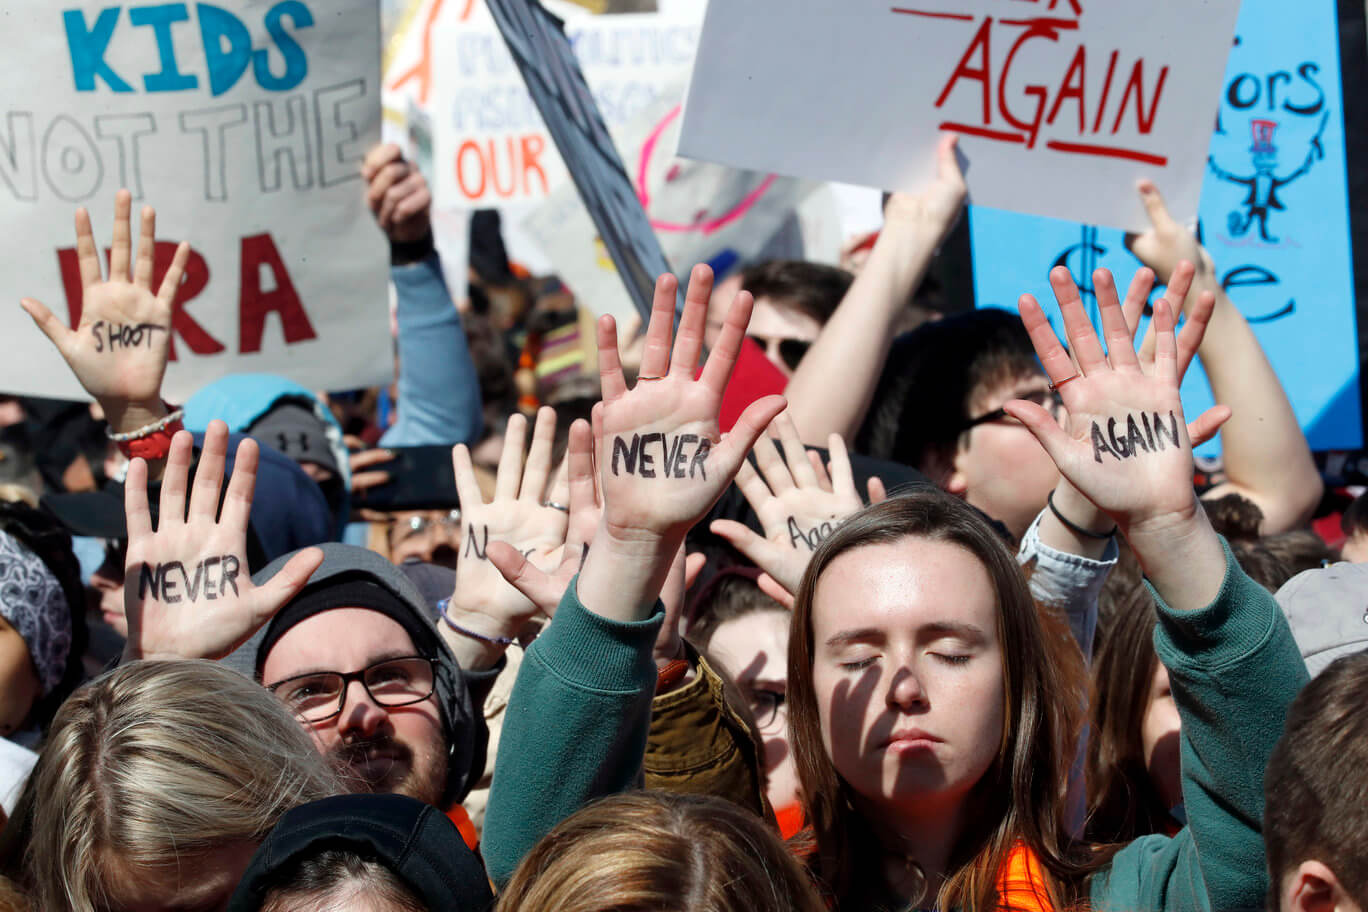 People hold their hands up with messages written on them during the March For Our Lives rally in support of gun control March in Washington. Photo courtesy-AP